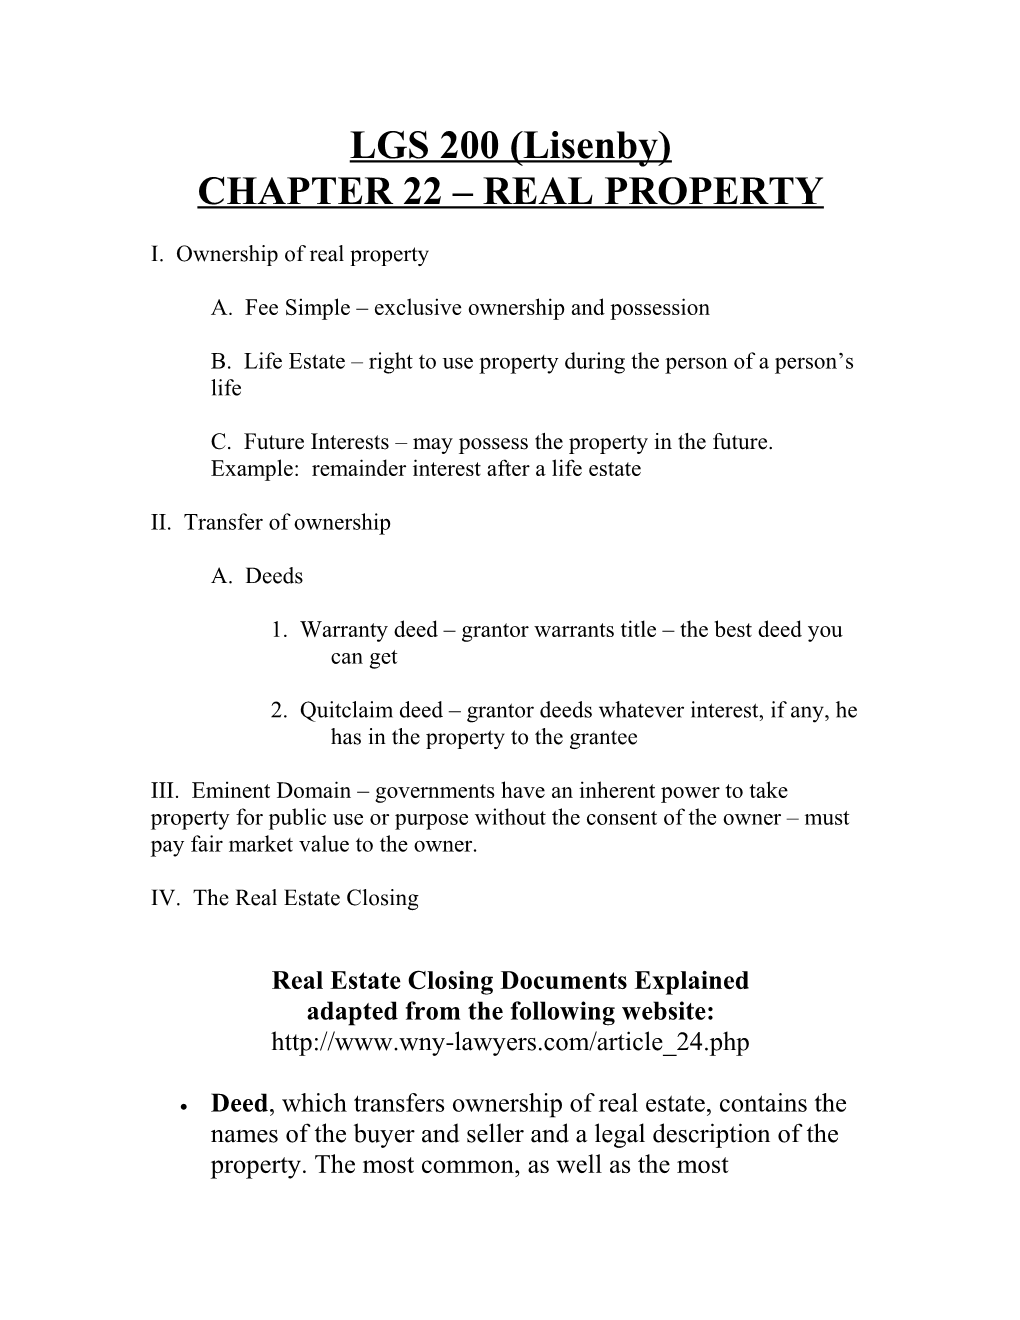 Real Estate Closing Documents Explained